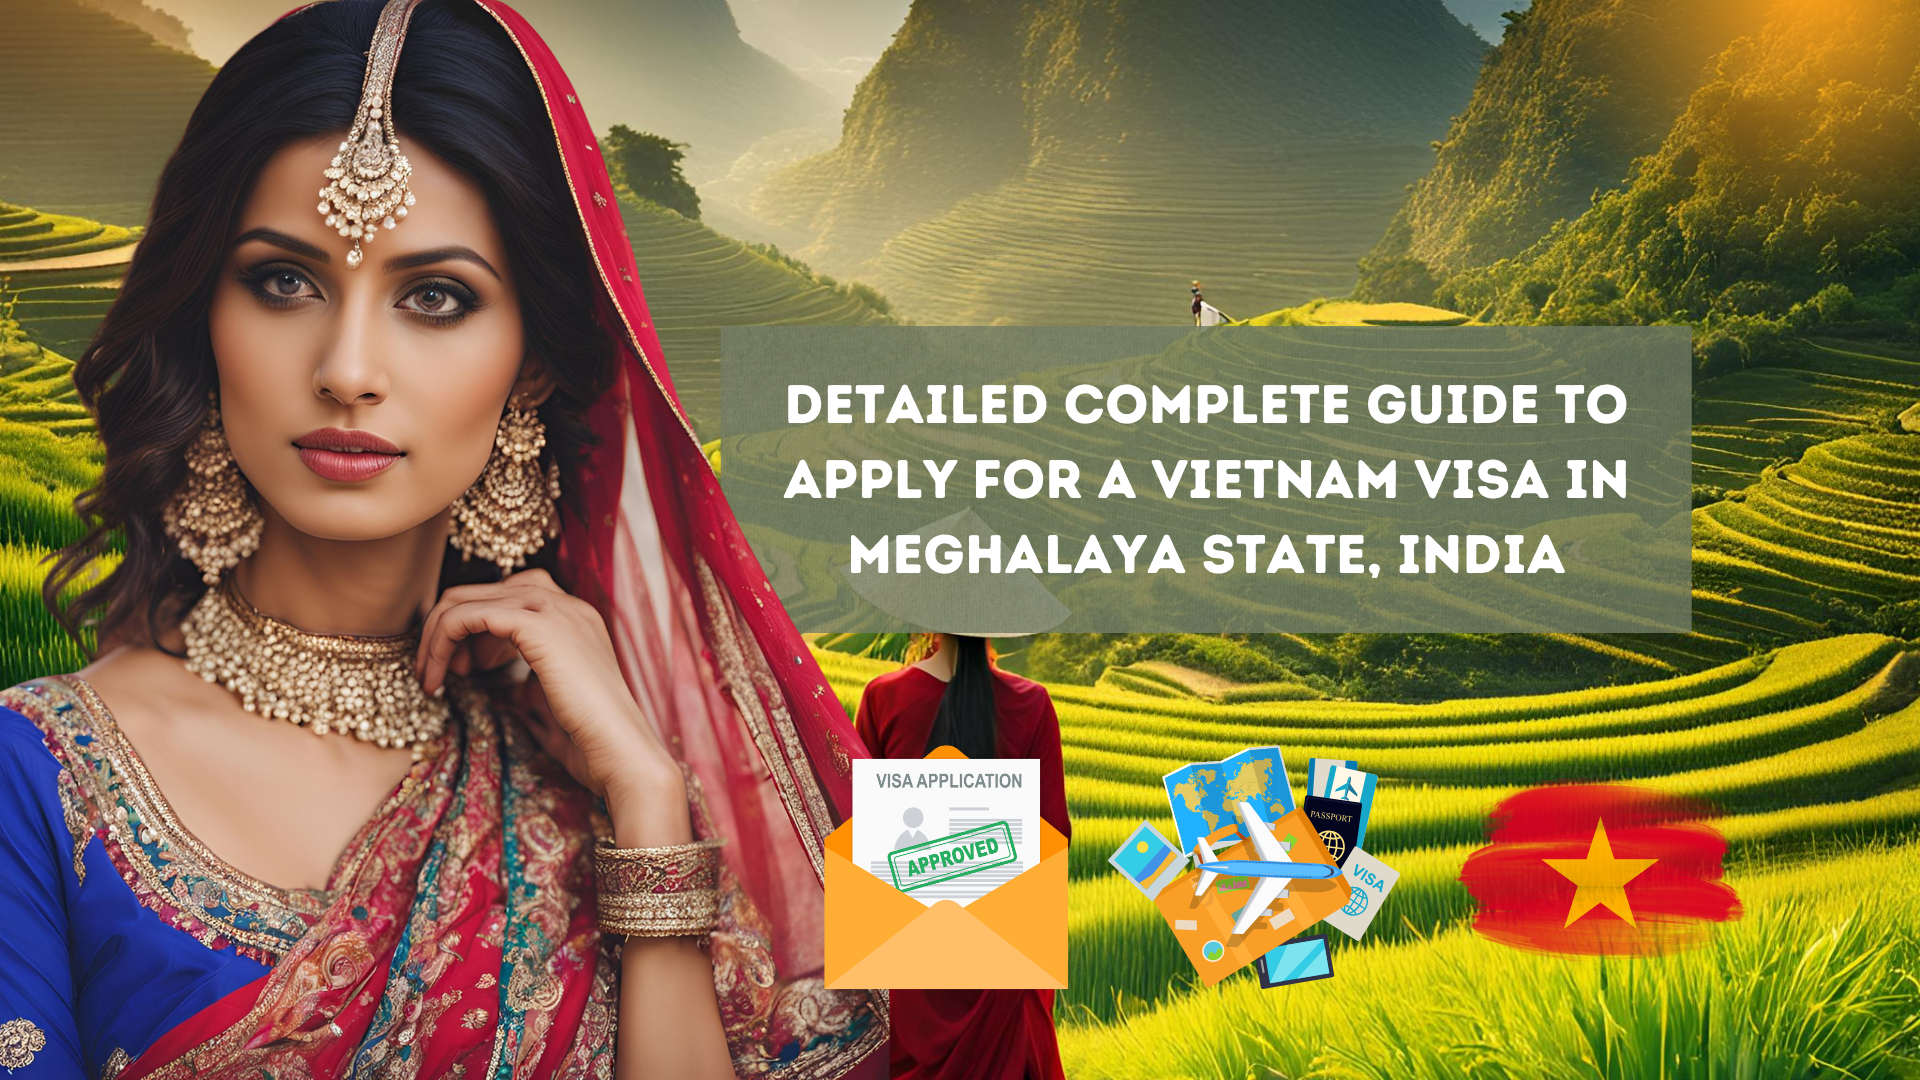 Detailed Complete Guide to Apply for a Vietnam Visa in Meghalaya State, India